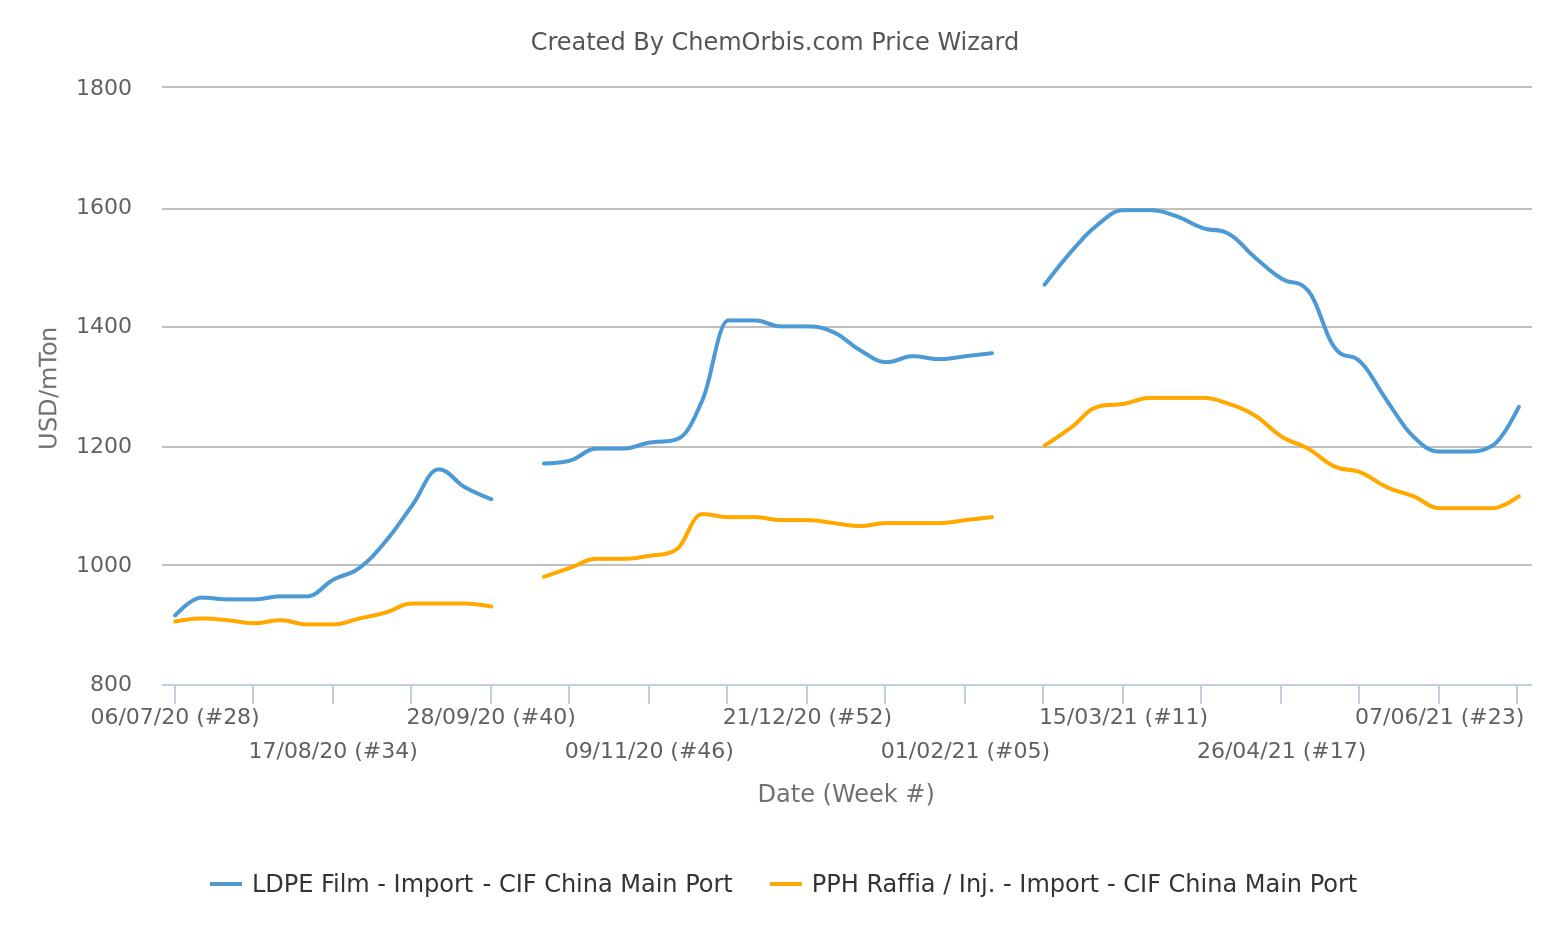 Import LDPE homo-PP prices – CIF China